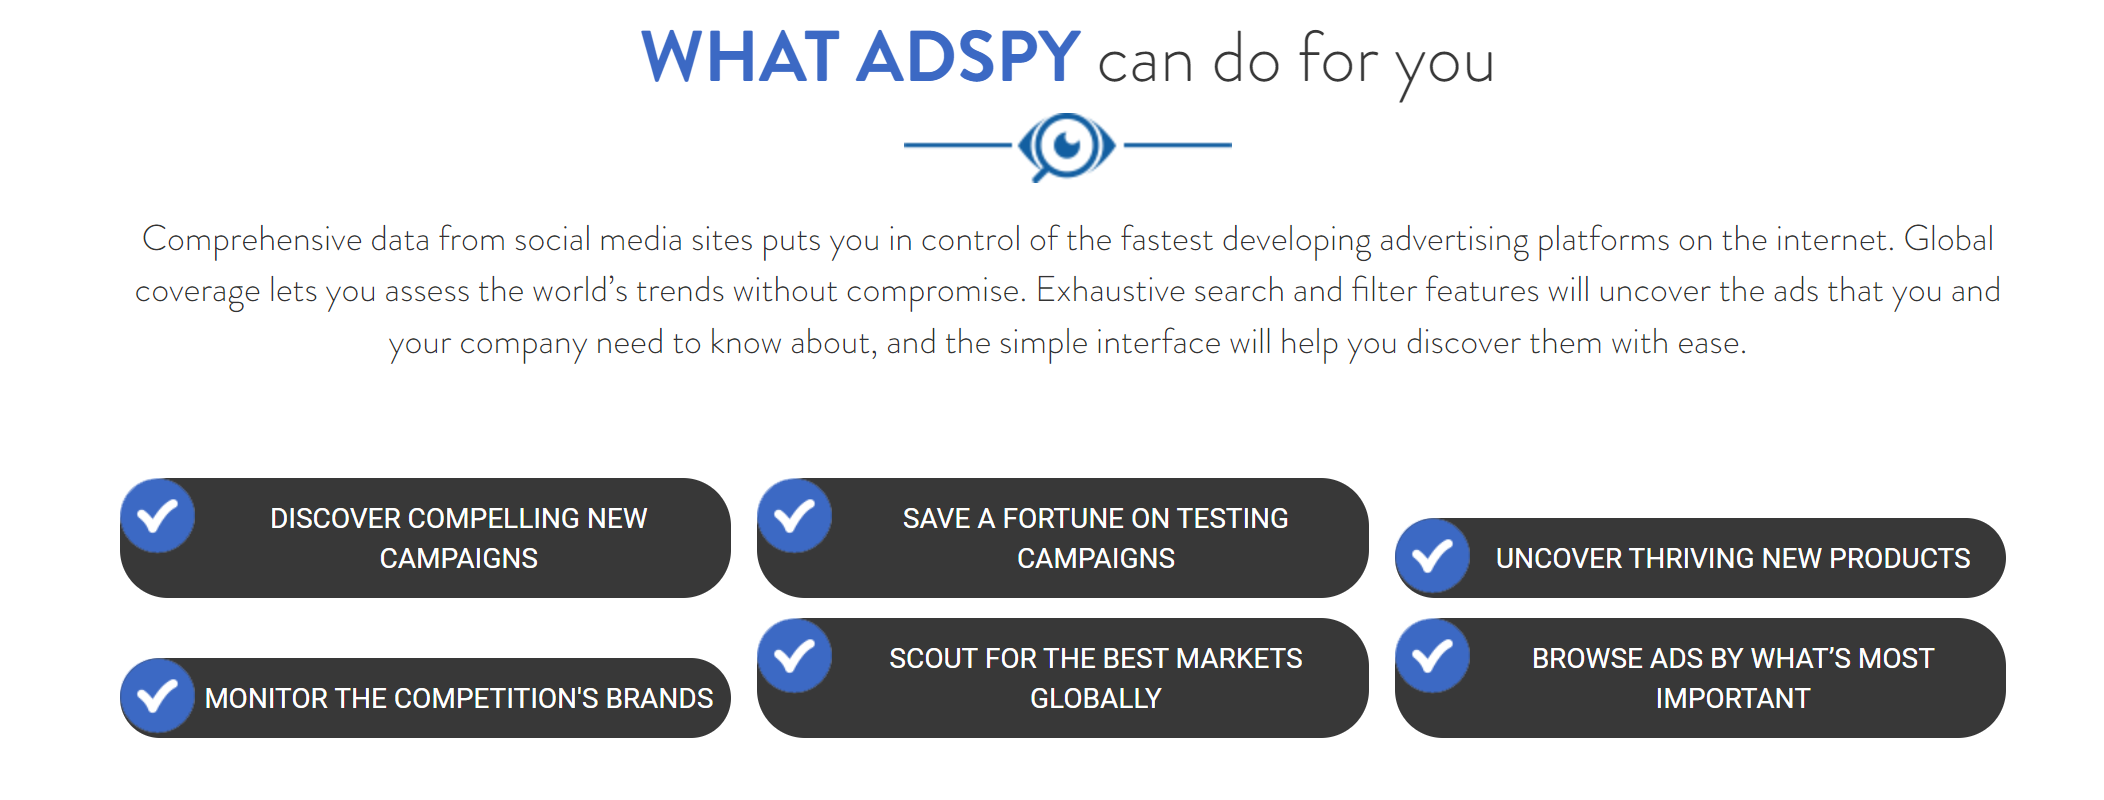 What adspy Can Do For You